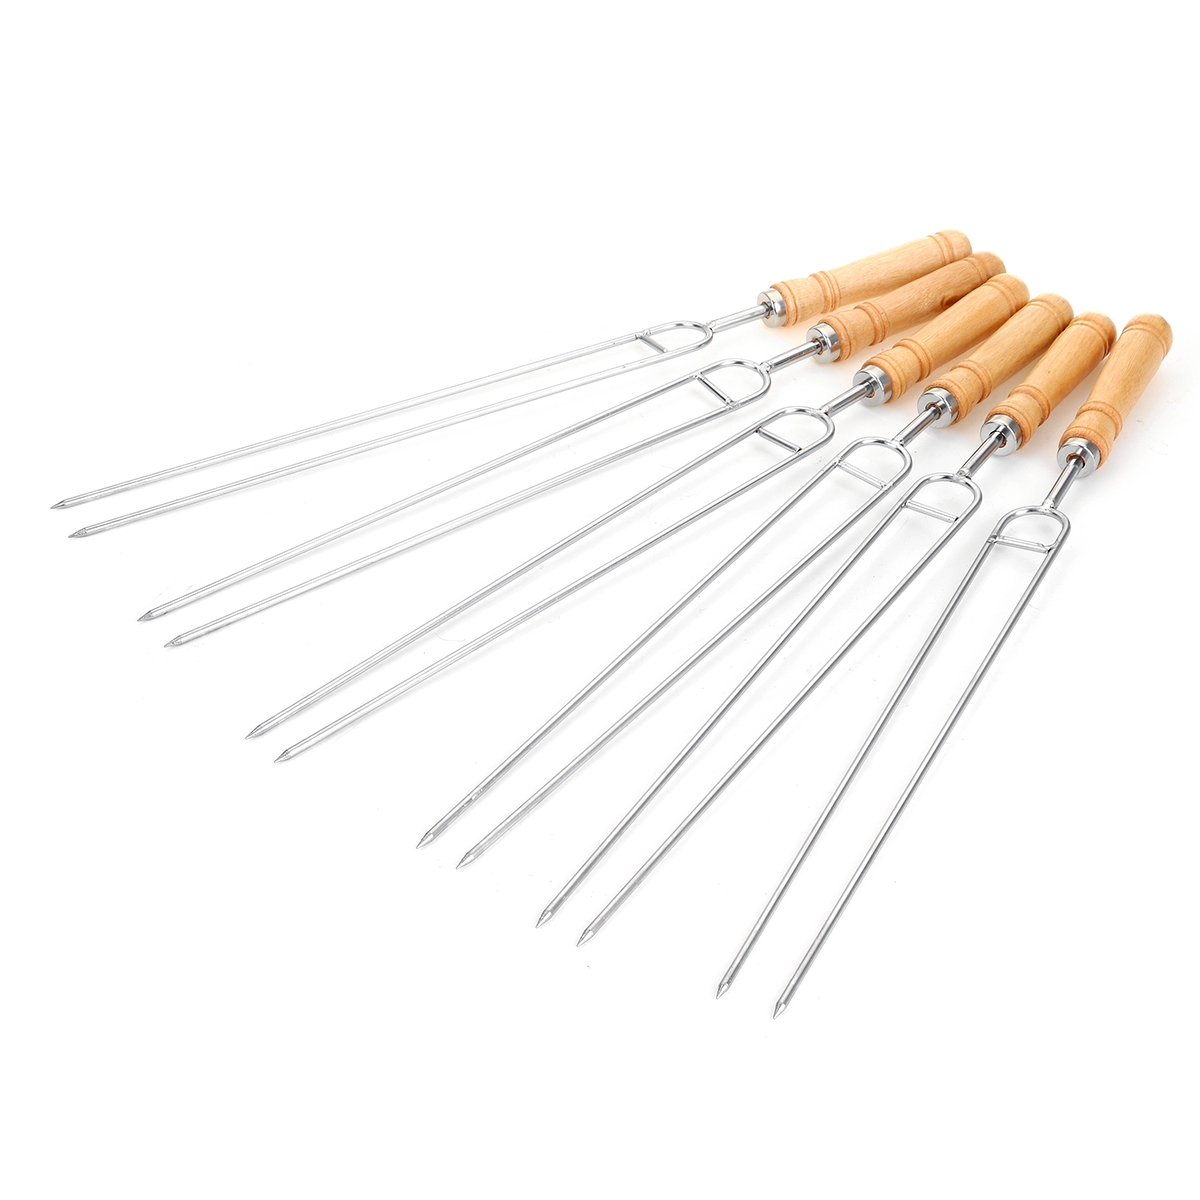 6PCSSet-Stainless-Steel-Wire-BBQ-Skewers-Wood-Handle-Grill-Roasting-Sticks-Outdoor-Camping-BBQ-Tool-1806341-3